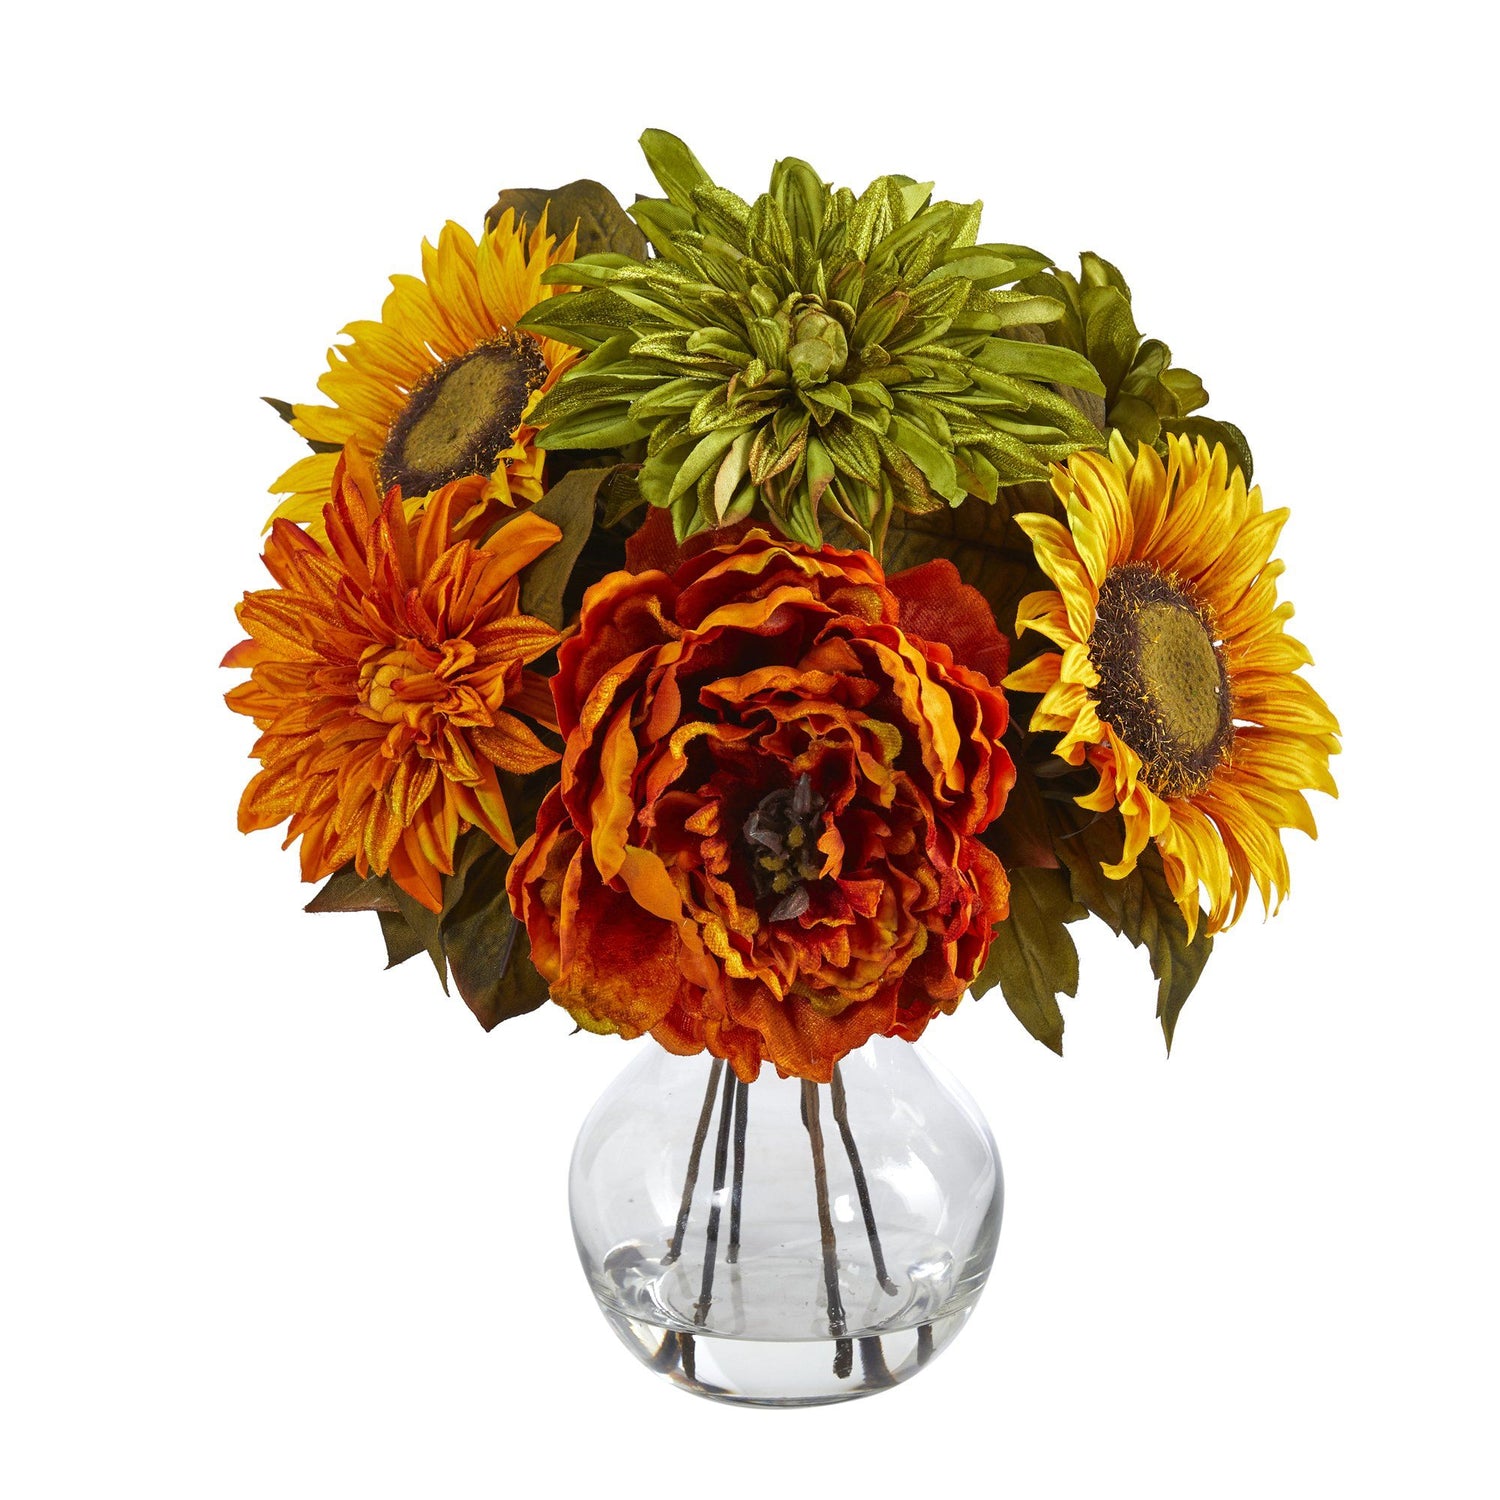 12” Peony, Dahlia and Sunflower Artificial Arrangement in Glass Vase